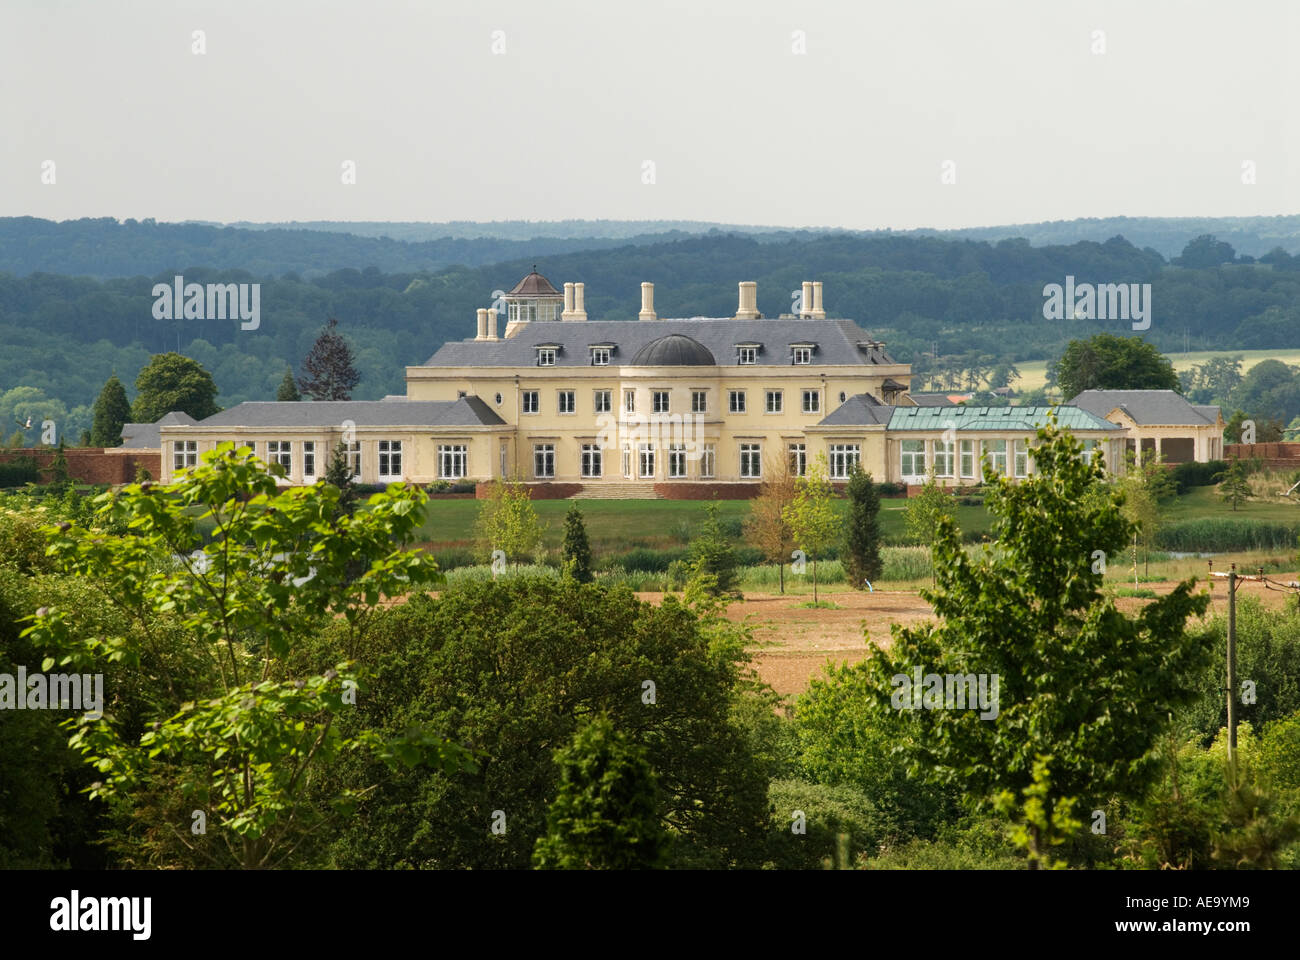 Quelm Park Mansion, Berkshire. near Henley on Thames OxfordshireNew build modern English country mansion 2006 2000s  UK HOMER SYKES Stock Photo